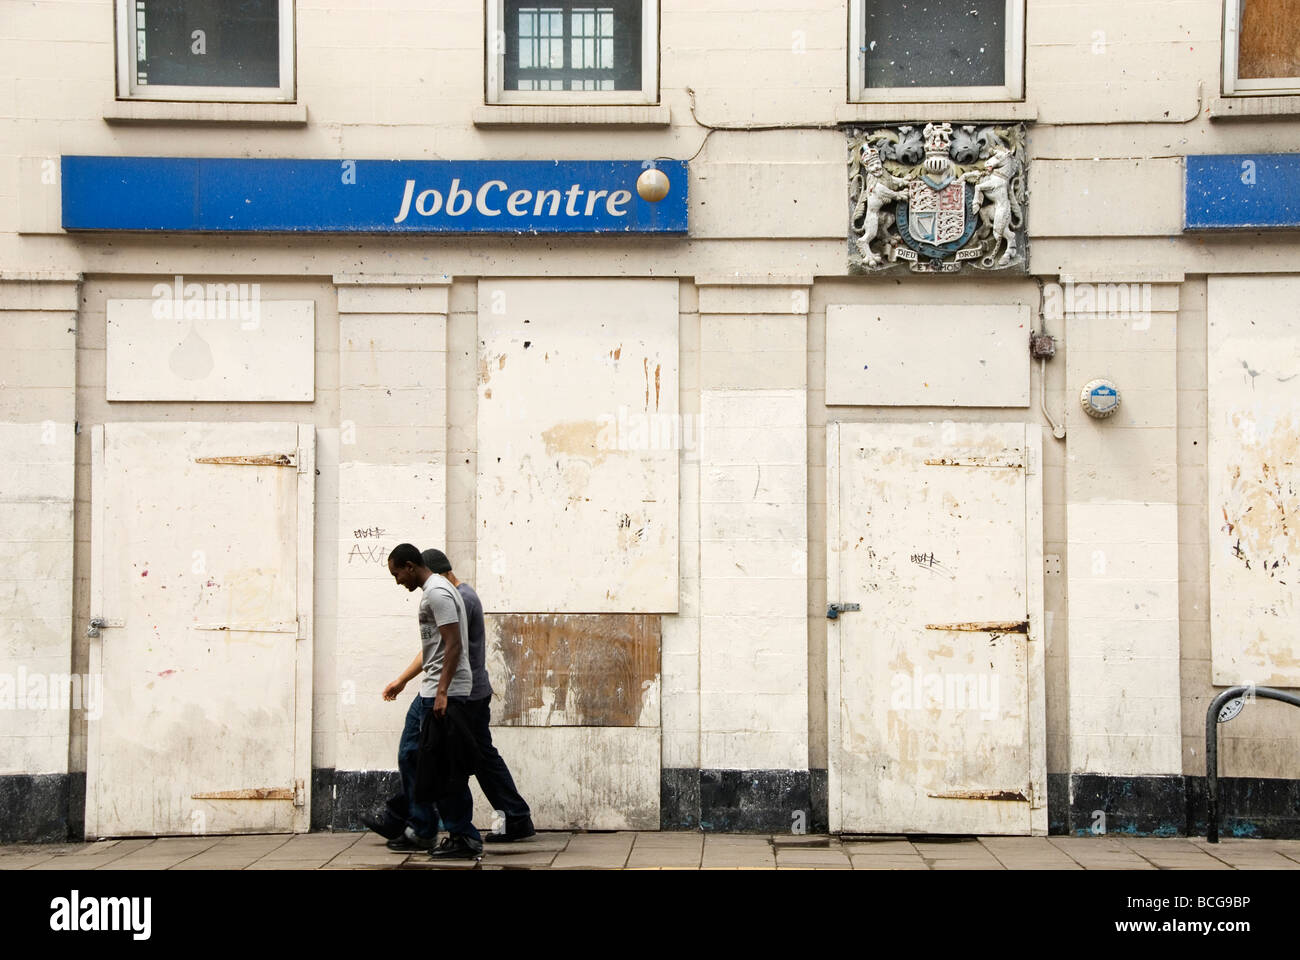 Shoreditch Closed and boarded up job centre with two men walking past Stock Photo